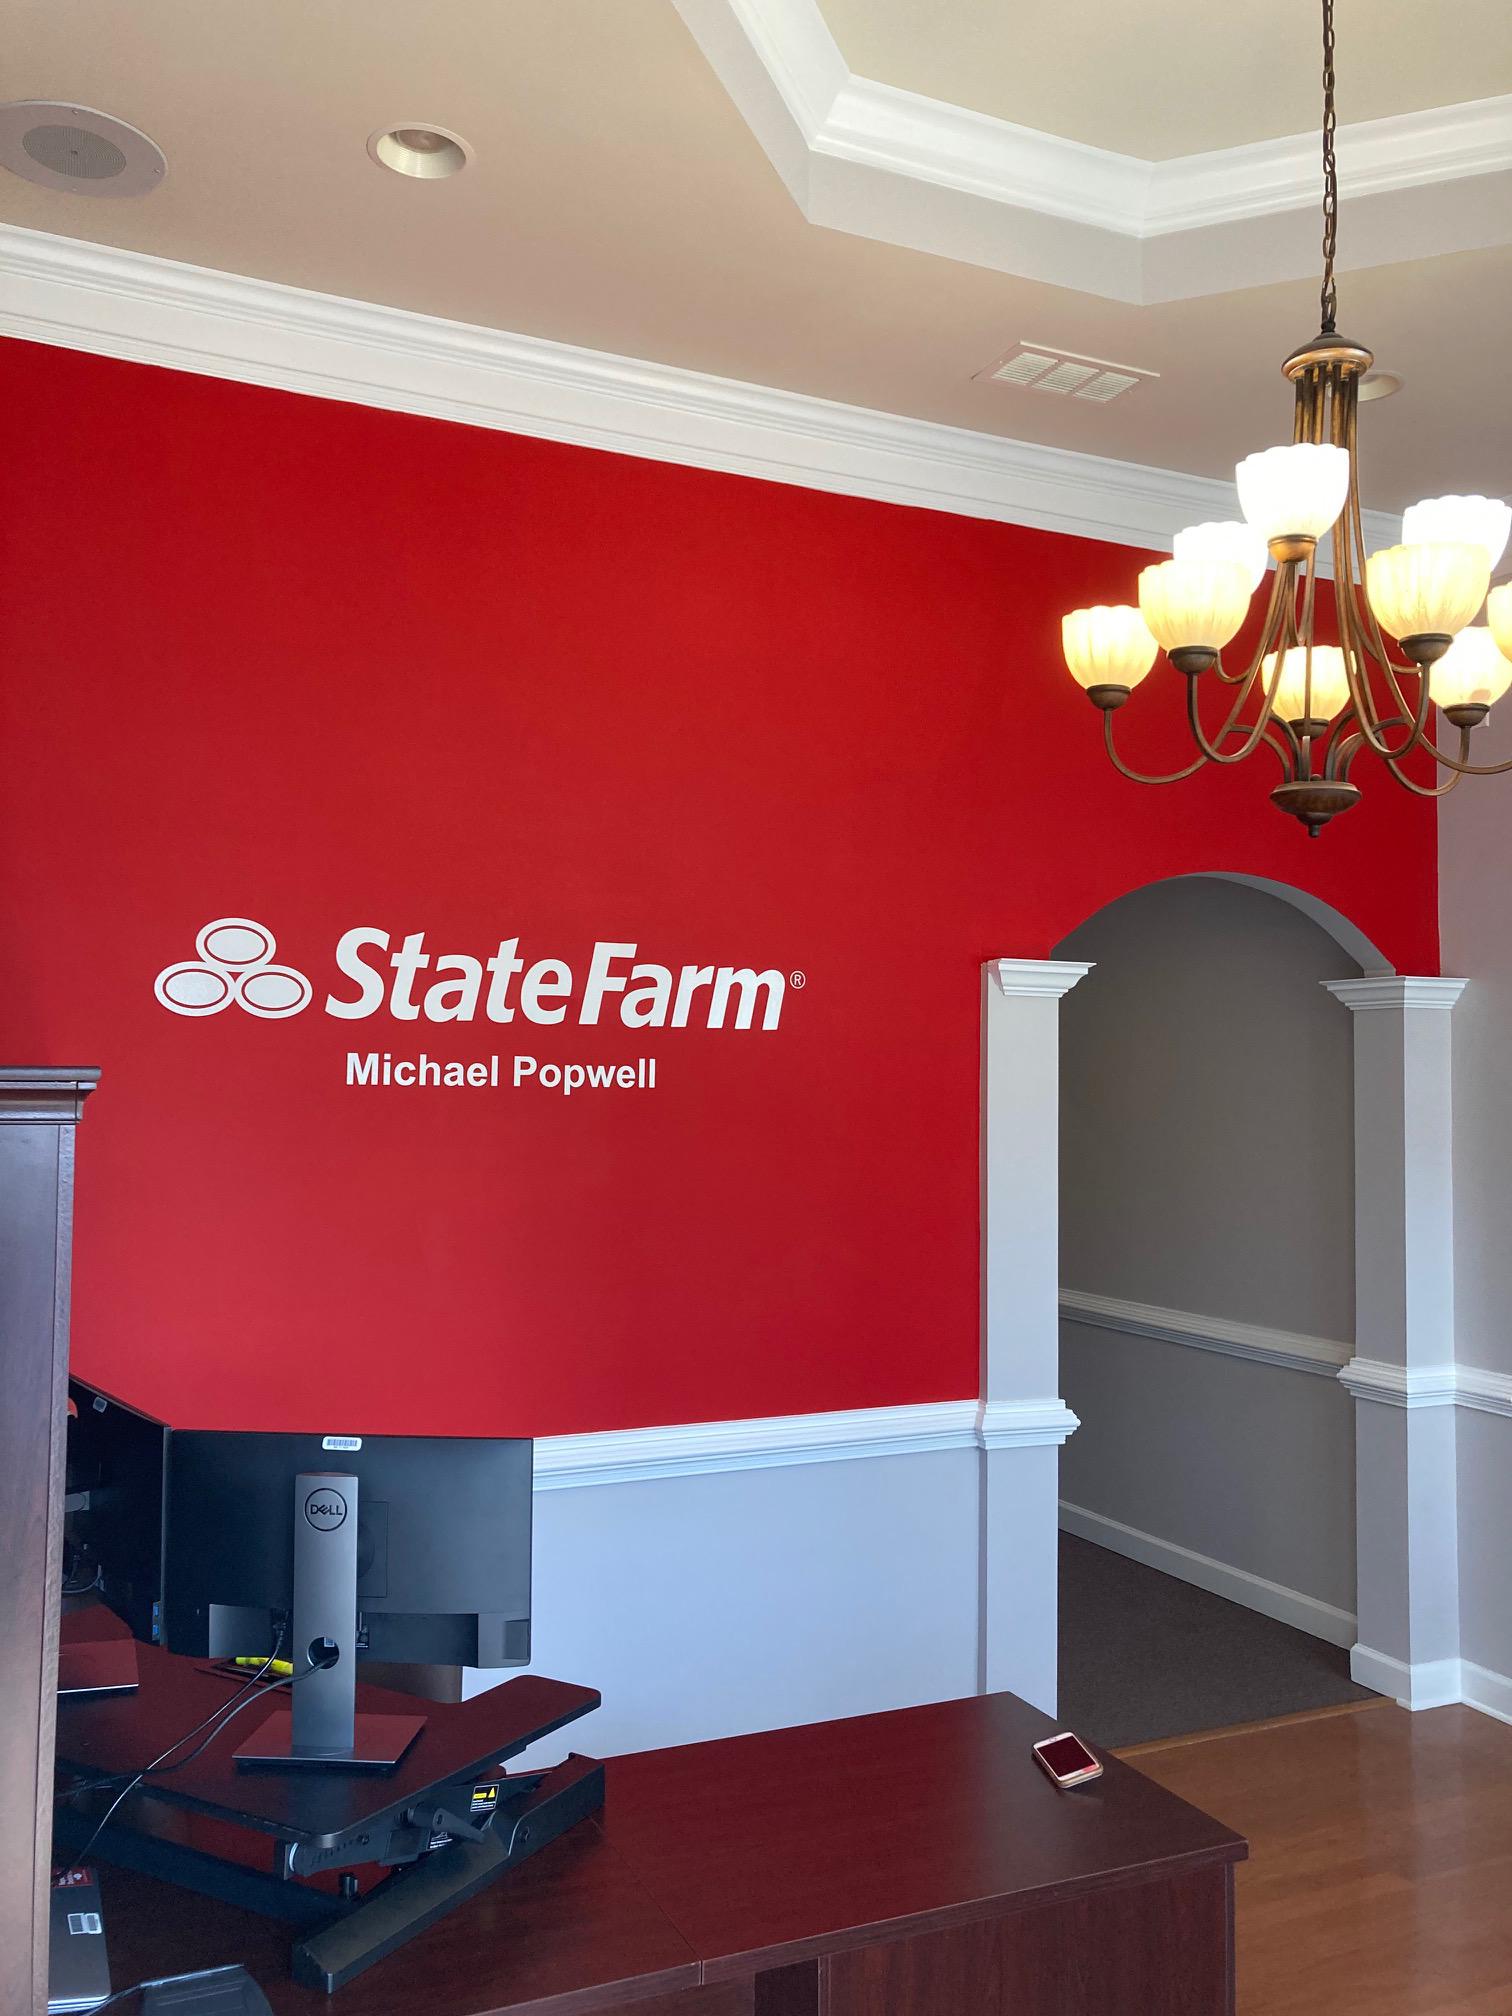 We love our beautiful office! Michael Popwell - State Farm Insurance Agent Suwanee (470)202-6131